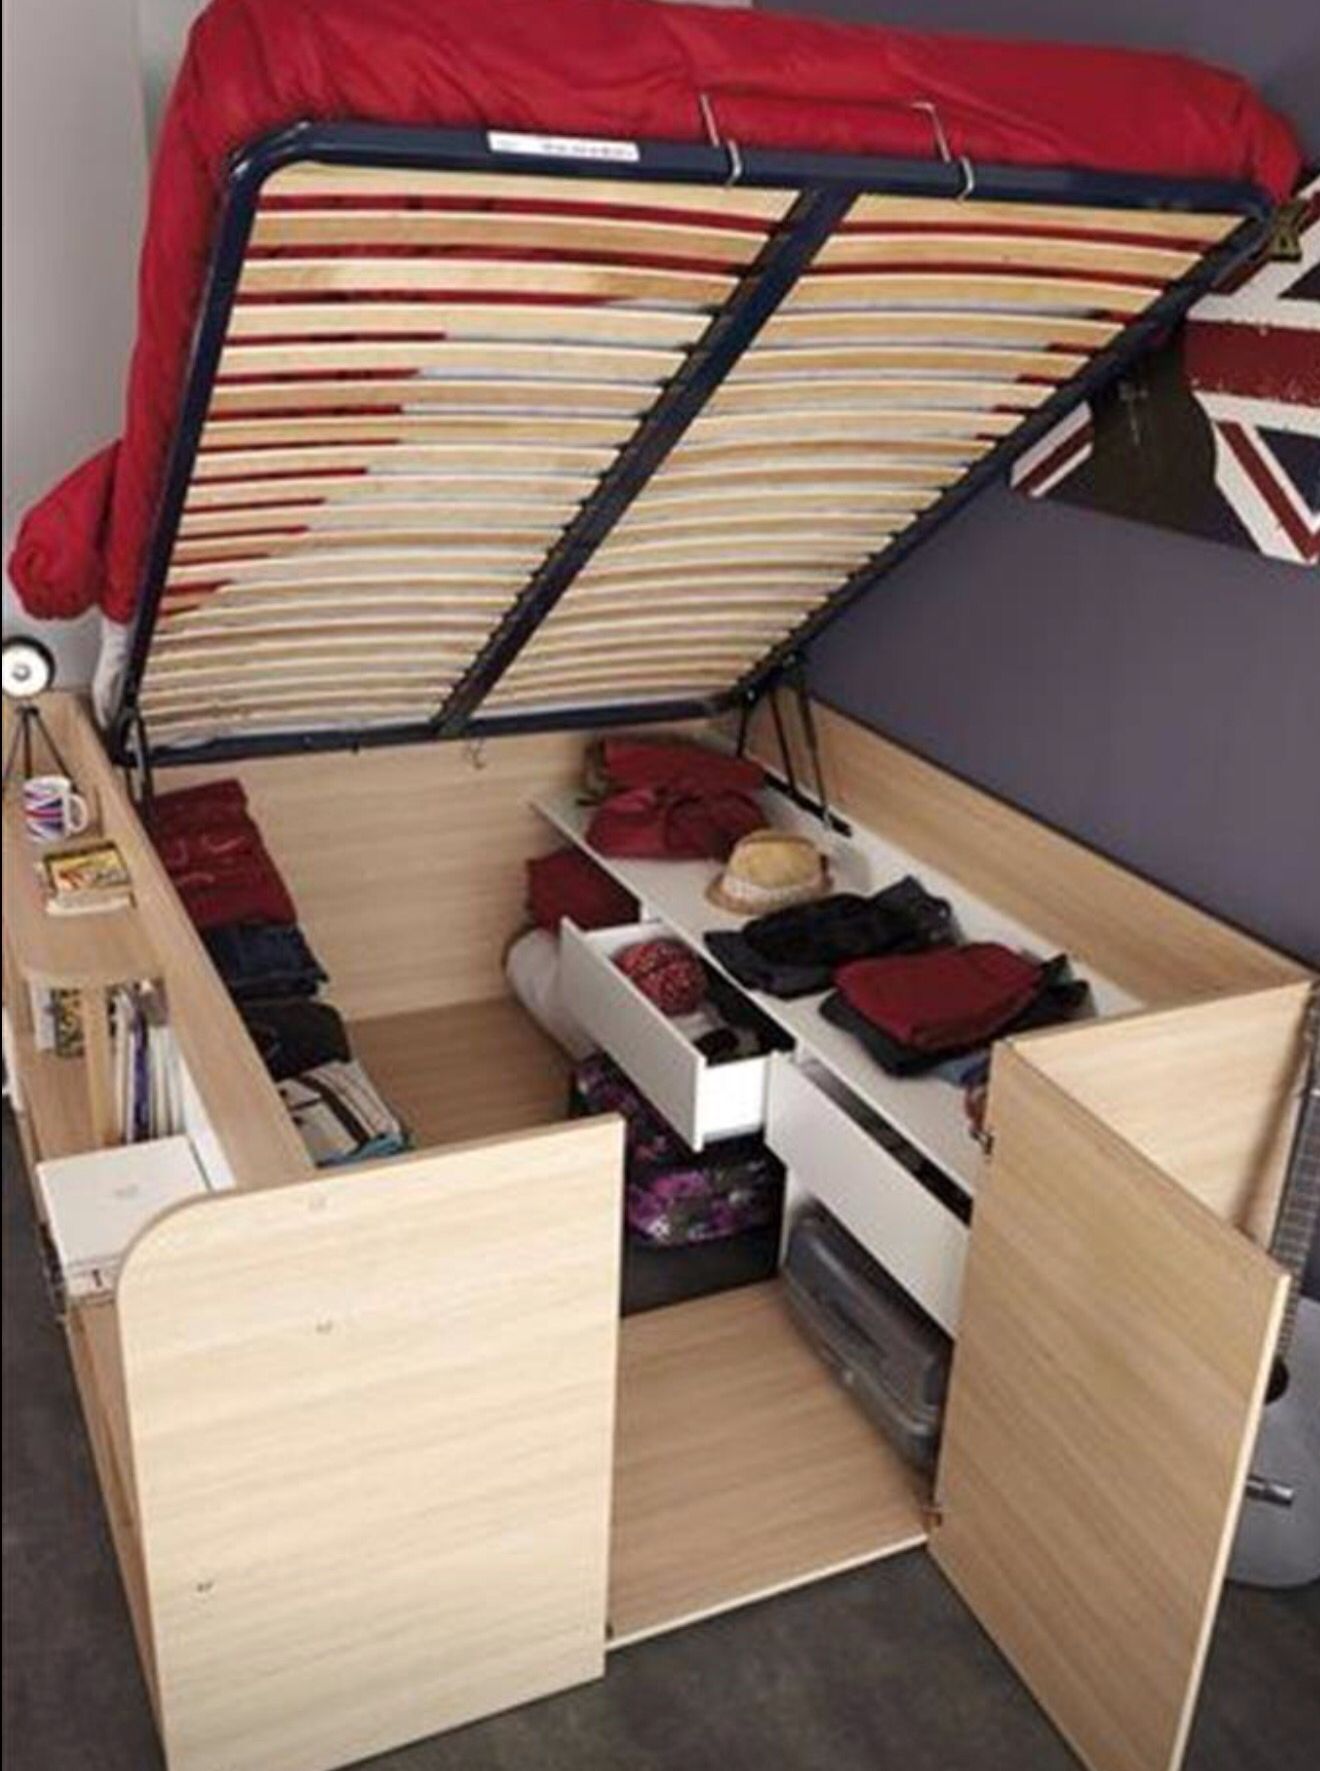 Cool idea for extra storage space in a smaller room.